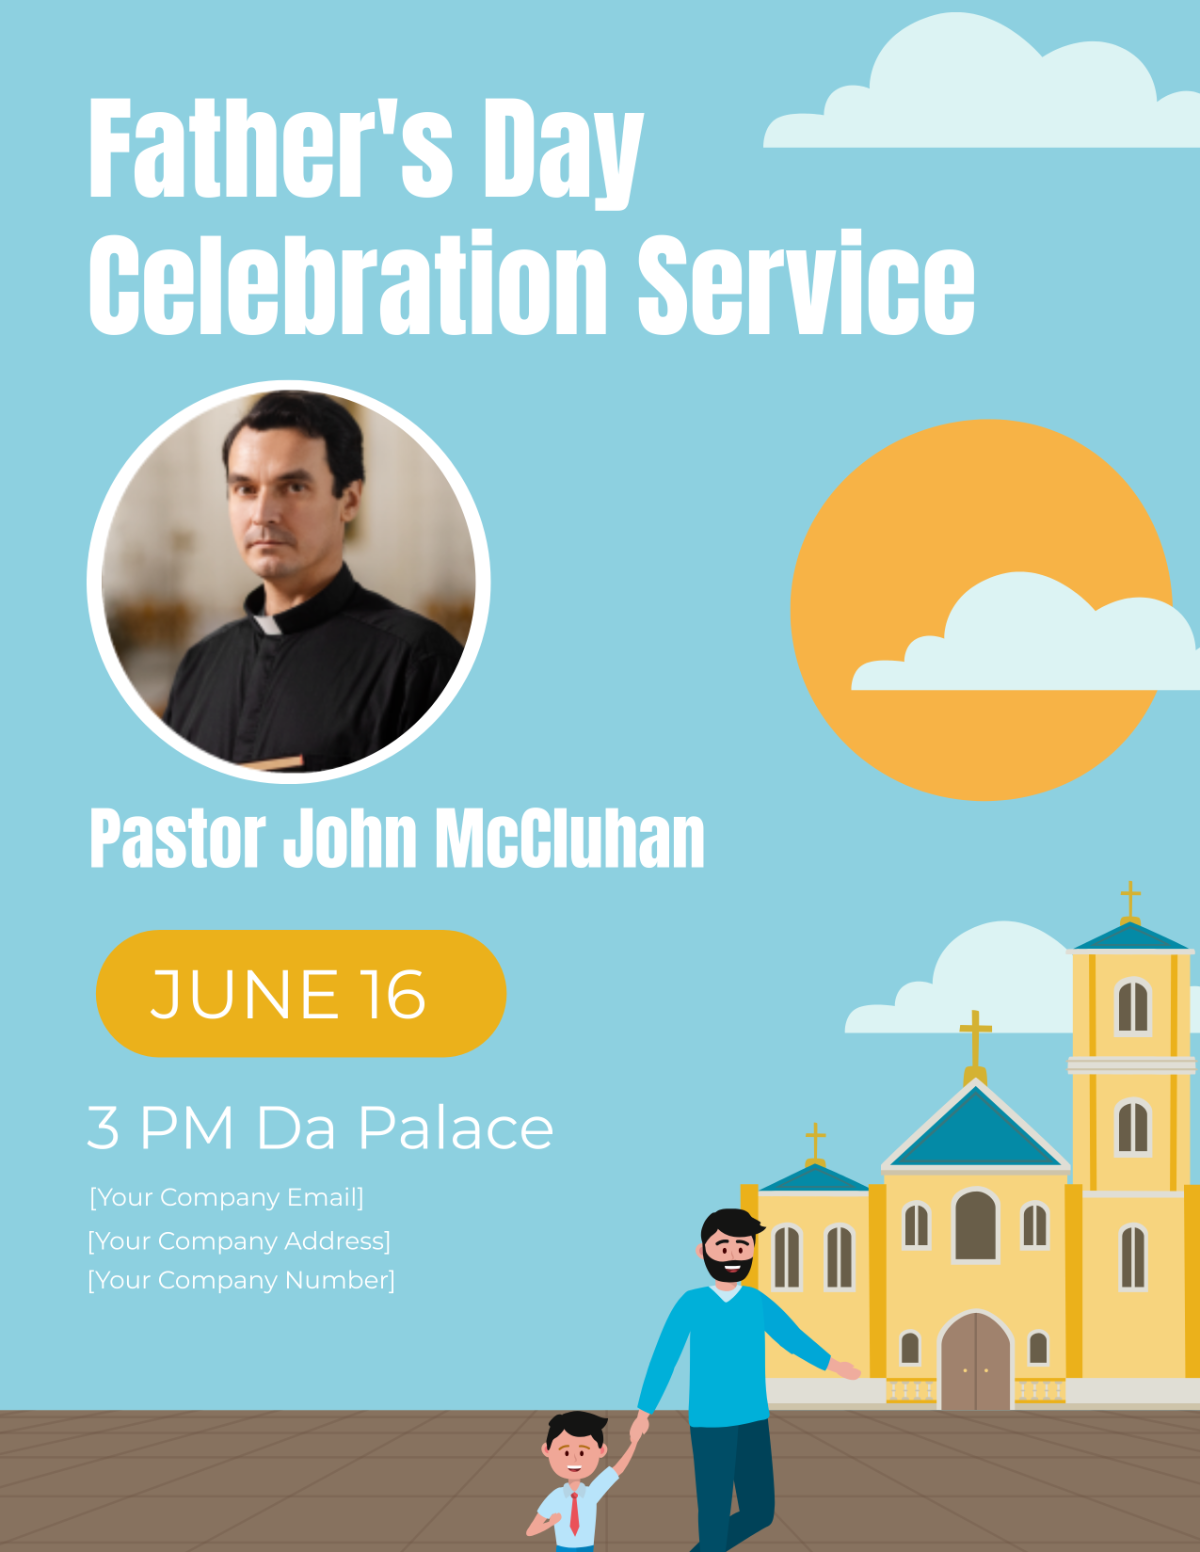 Father's Day Service Flyer